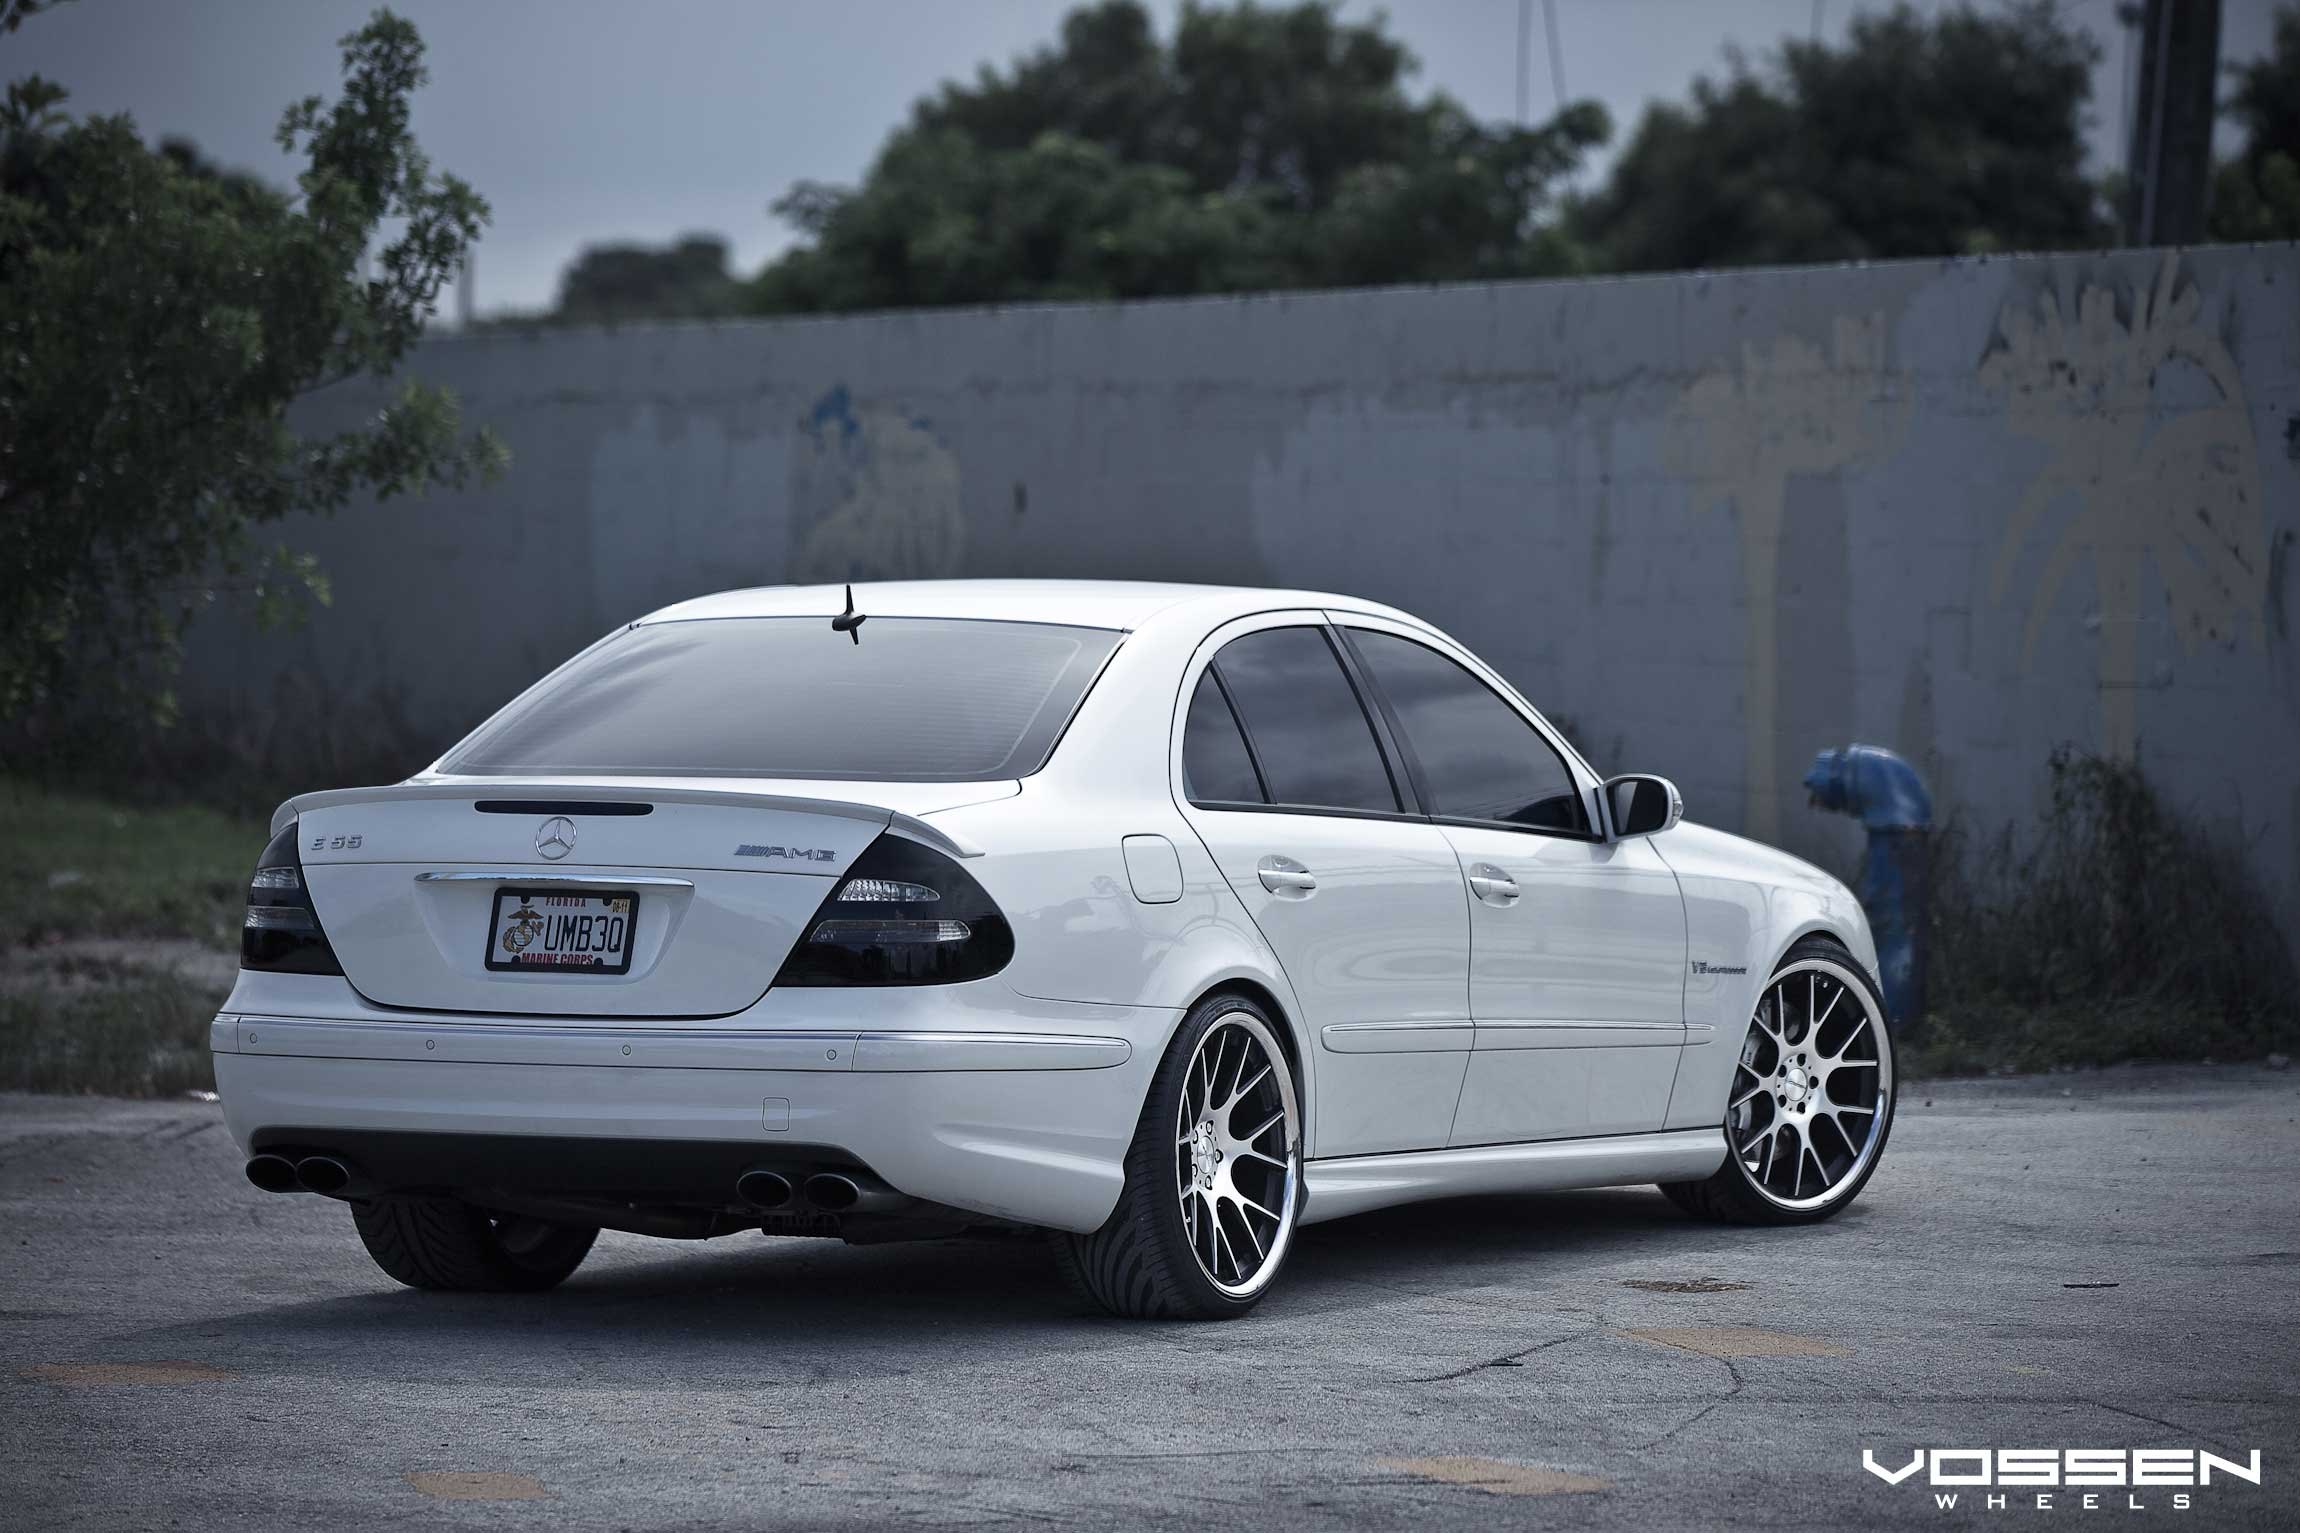 White Mercedes E Class with Dark Smoke LED Taillights - Photo by Vossen